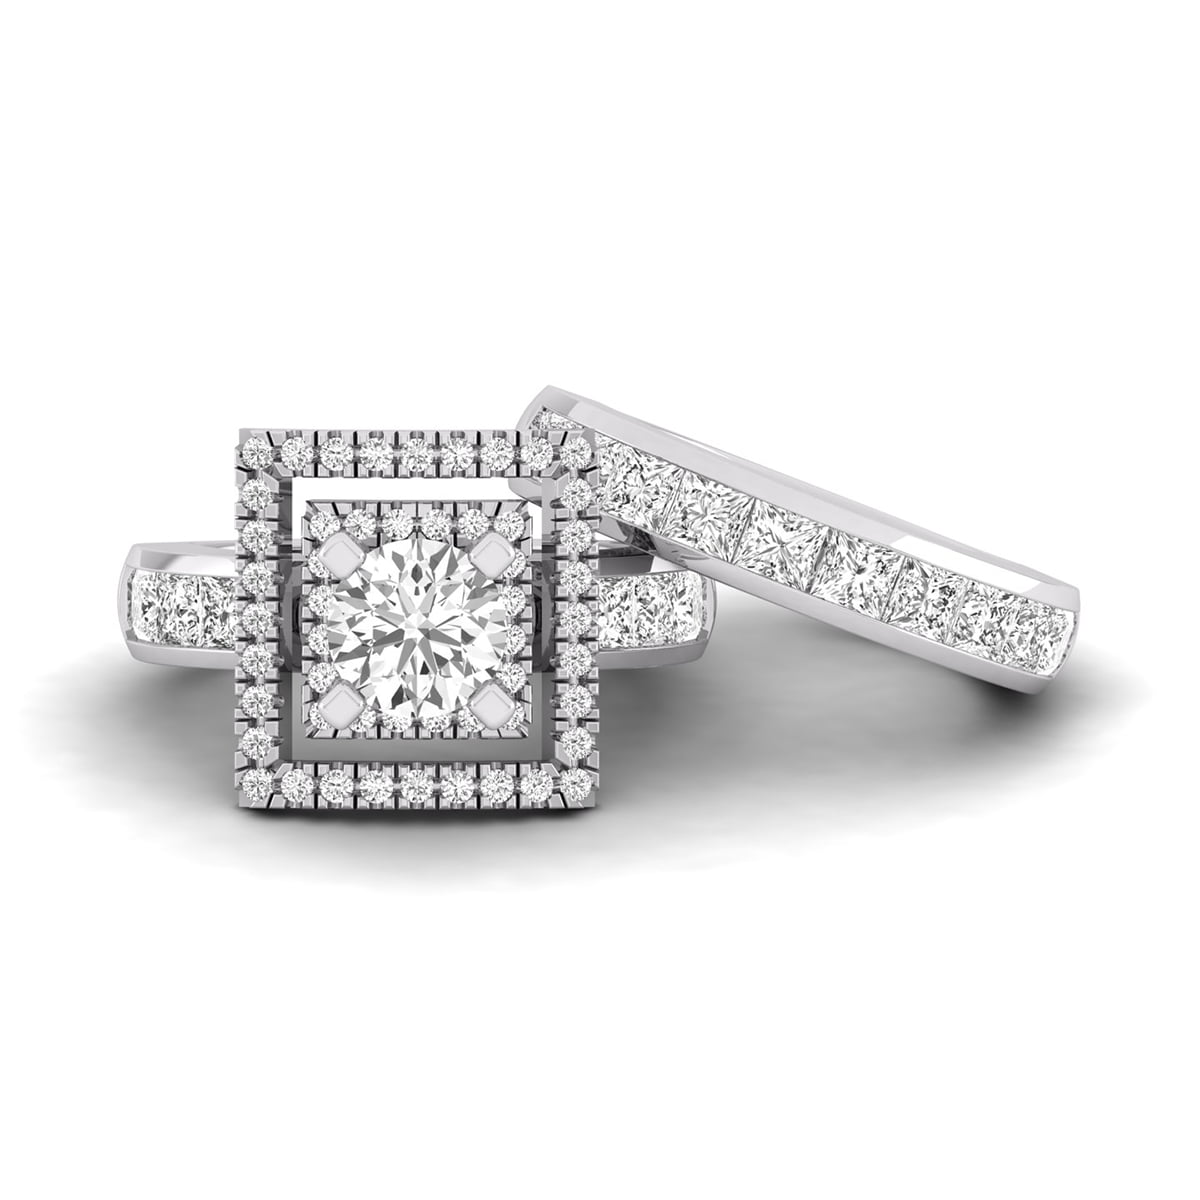 Round And Princess Cut CZ Stone Double Square Halo Channel Setting Wedding Ring Set (4 5/7 TCW)